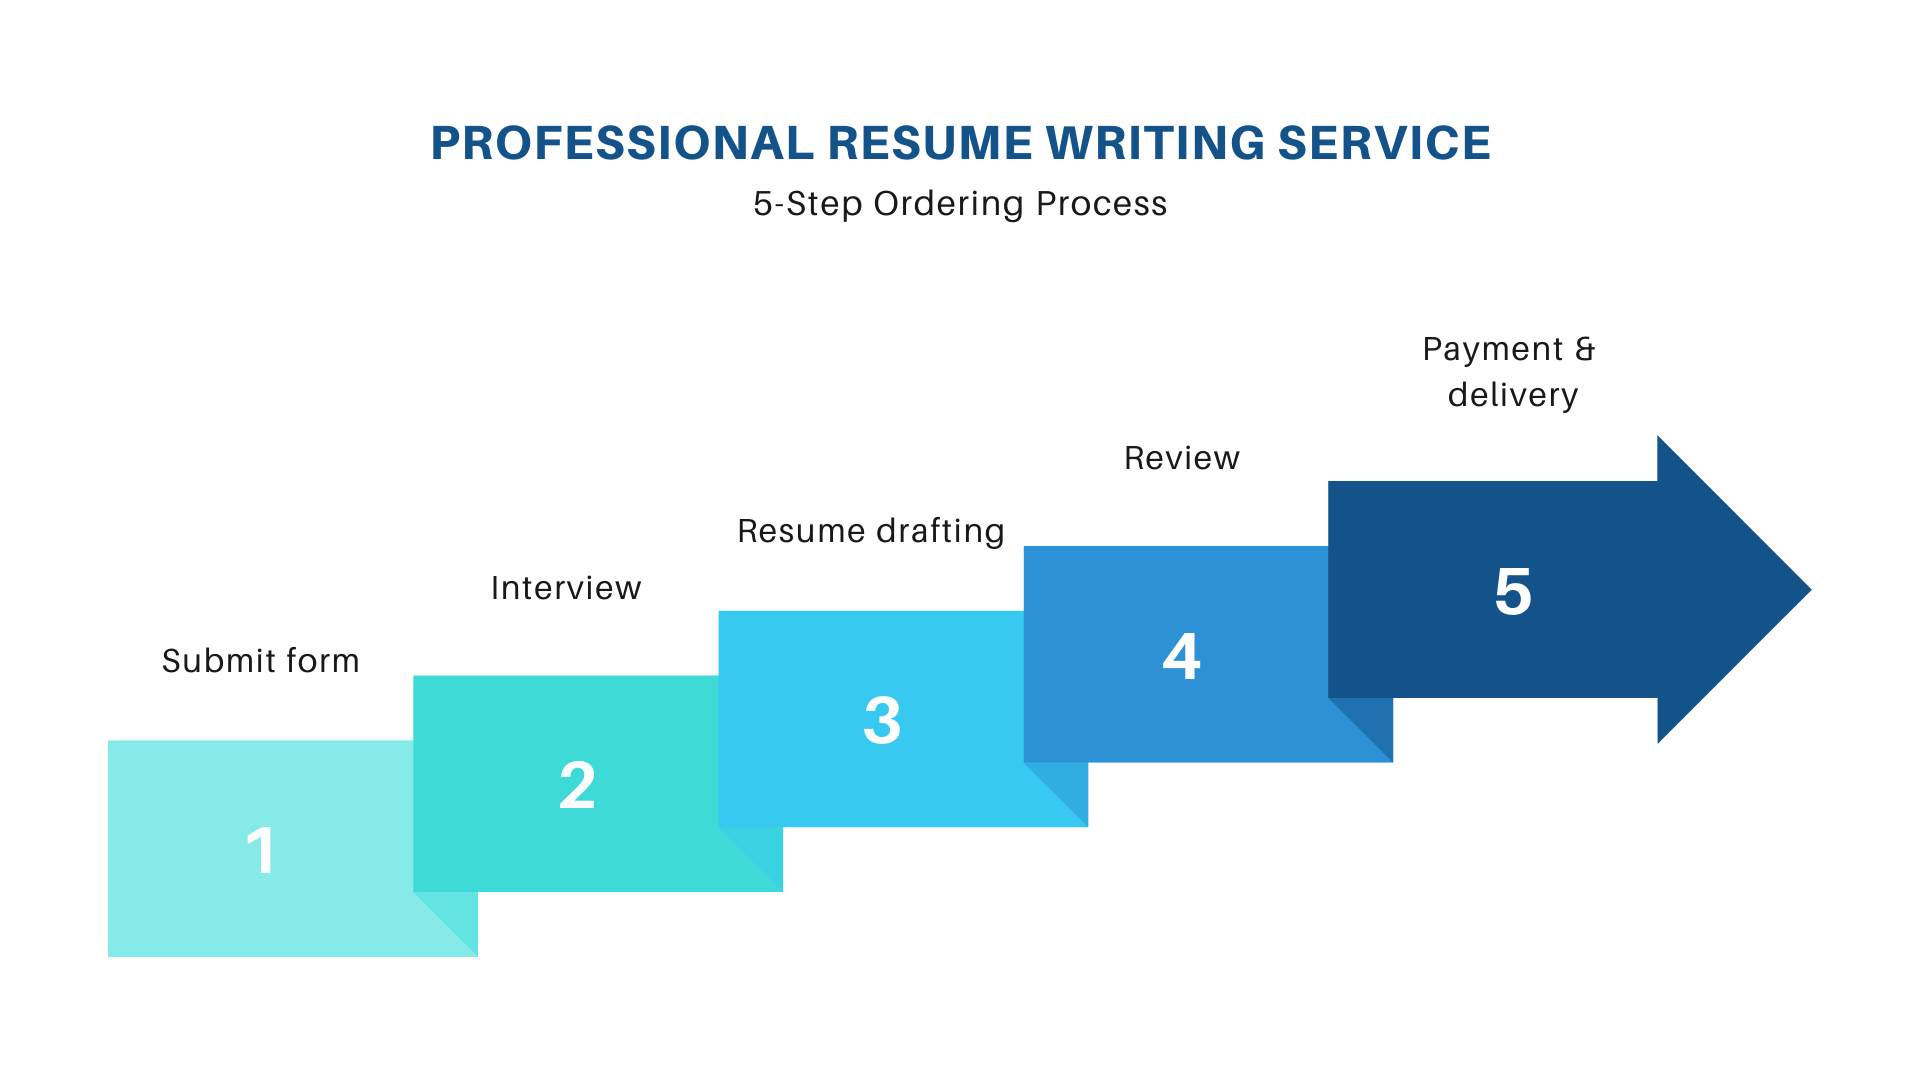 what are the types of resume writing services